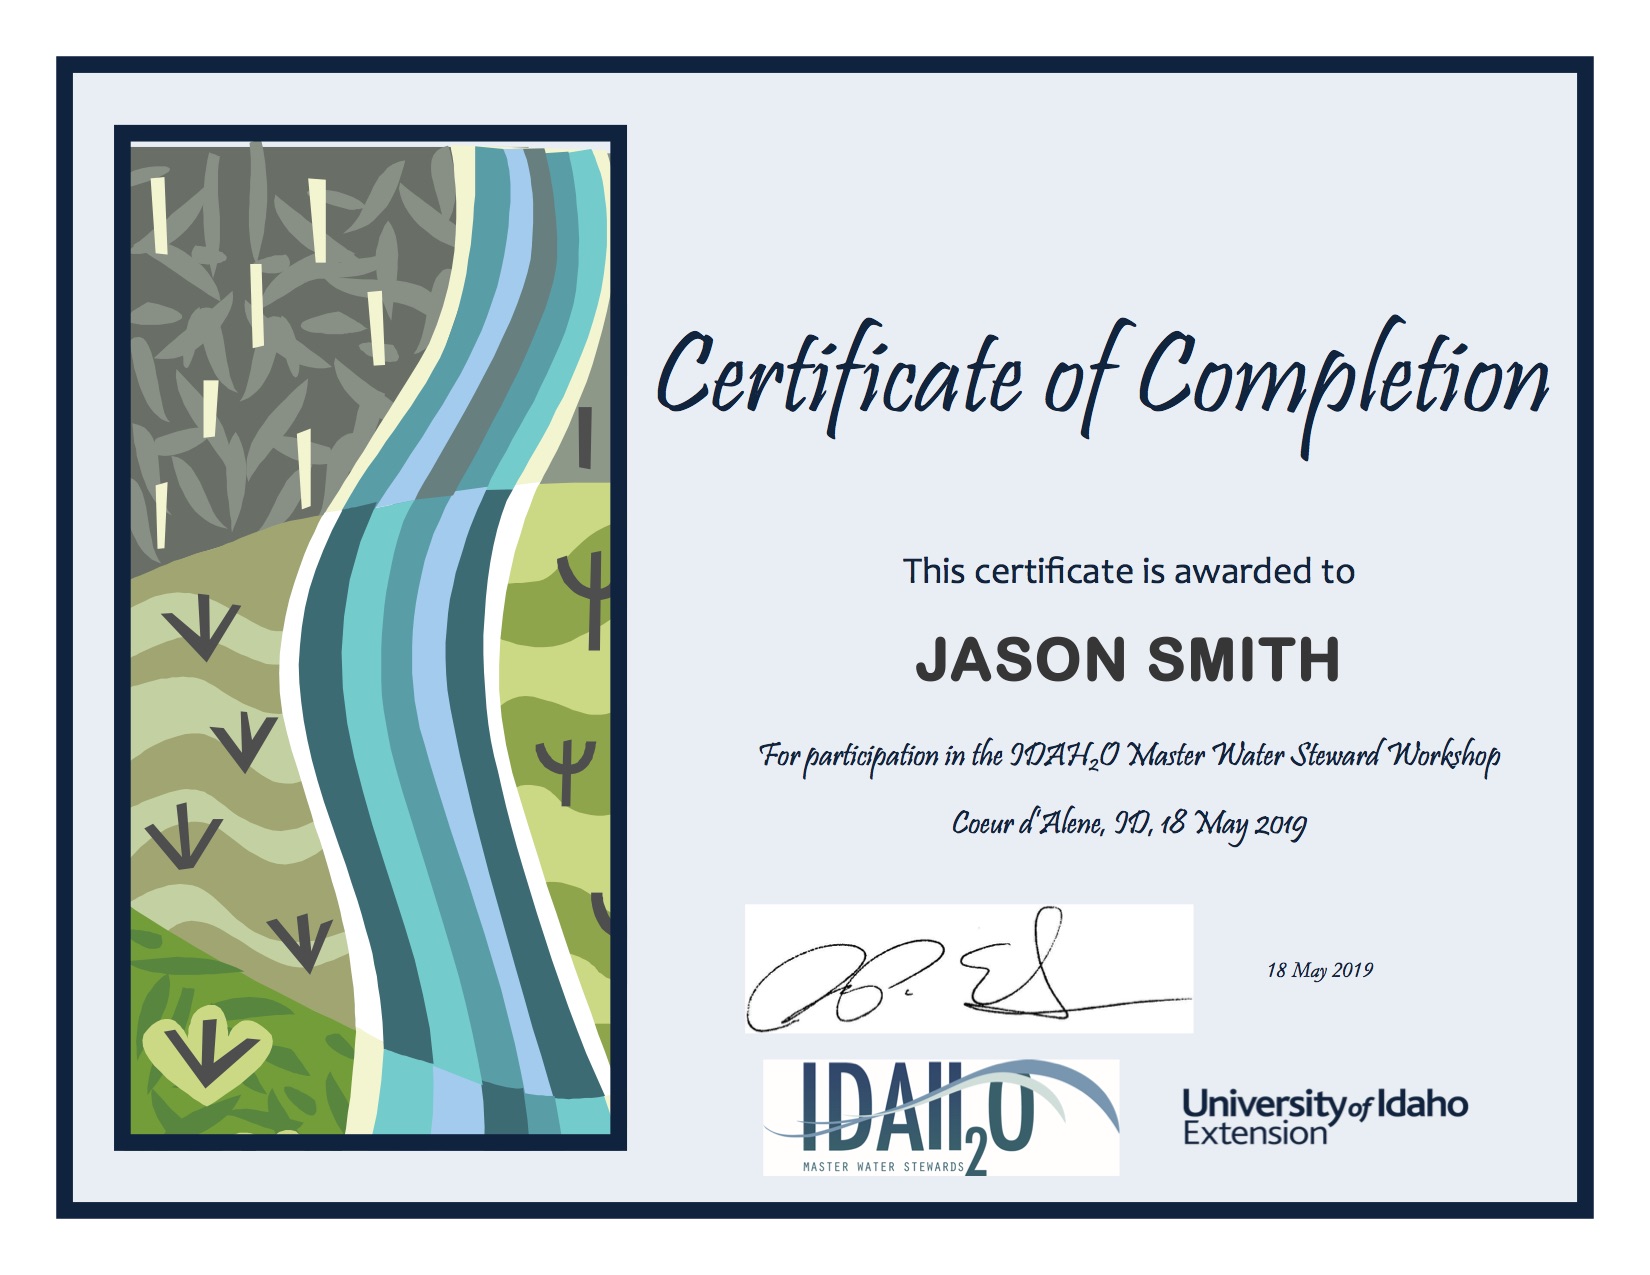 Certificate of Completion_Coeur dAlene_18 May 2019_Jason Smith